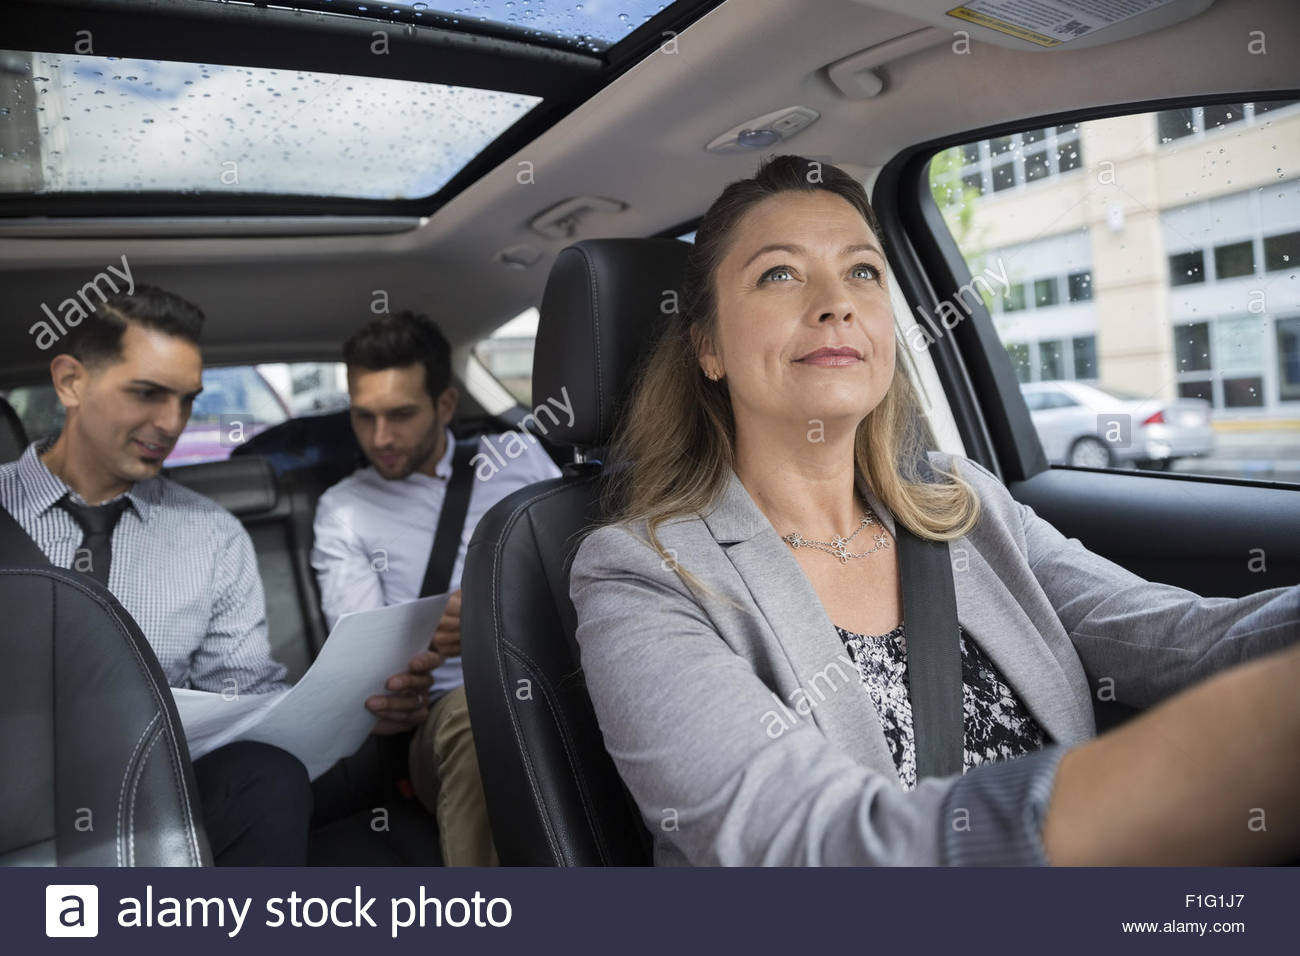 Business people carpooling in car Stock Photo